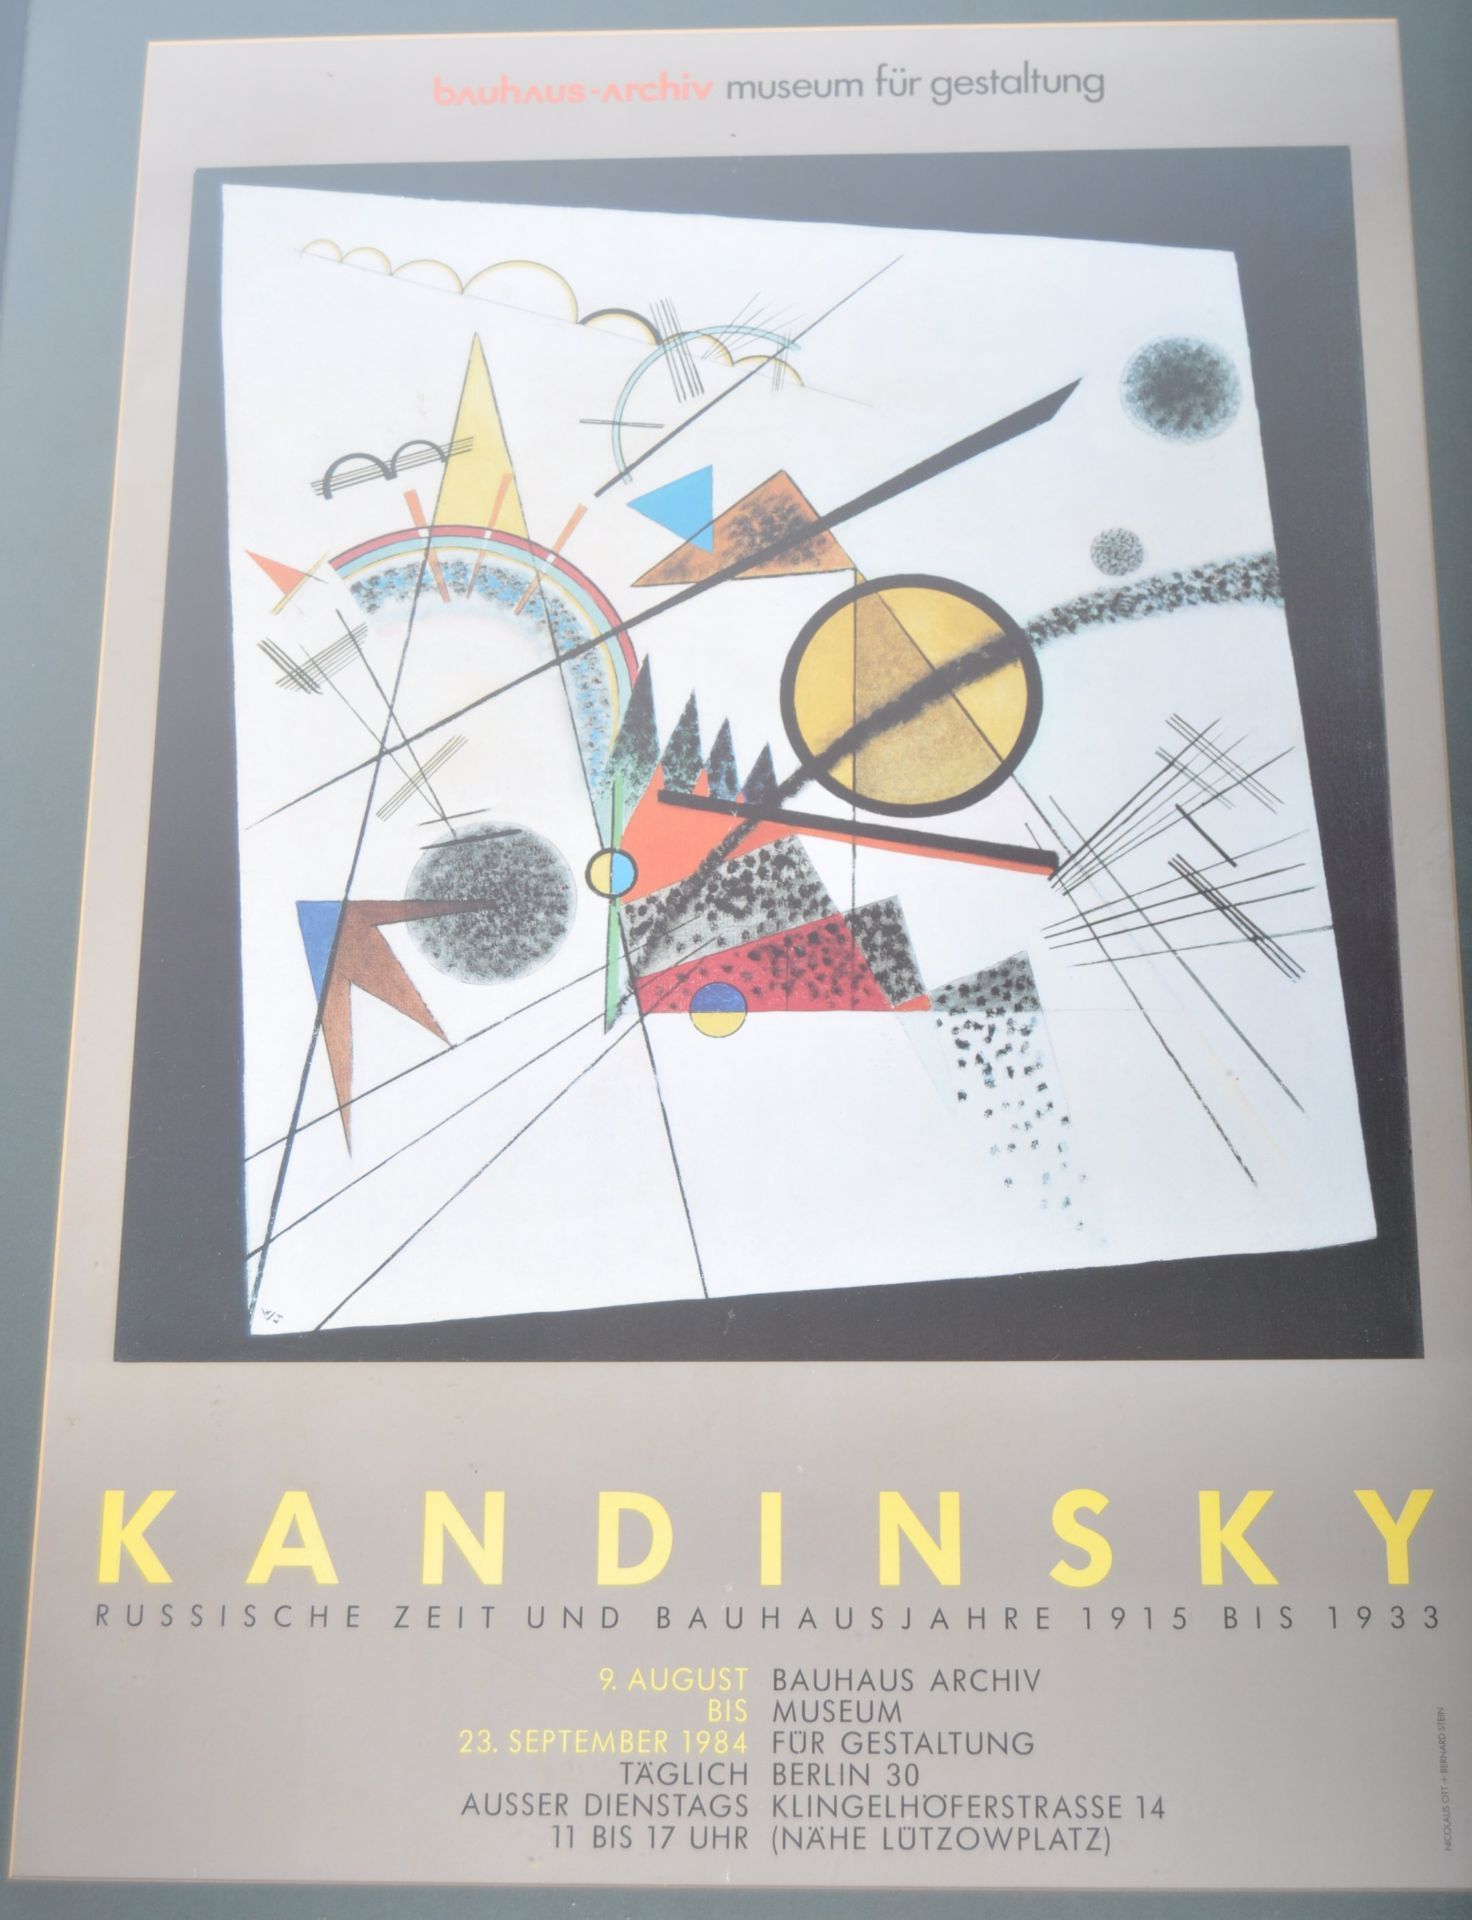 KANDINSKY 1980'S MUSEUM EXHIBITION POSTER FOR BAUHAUS ARCHIV MUSEUM - Image 2 of 5